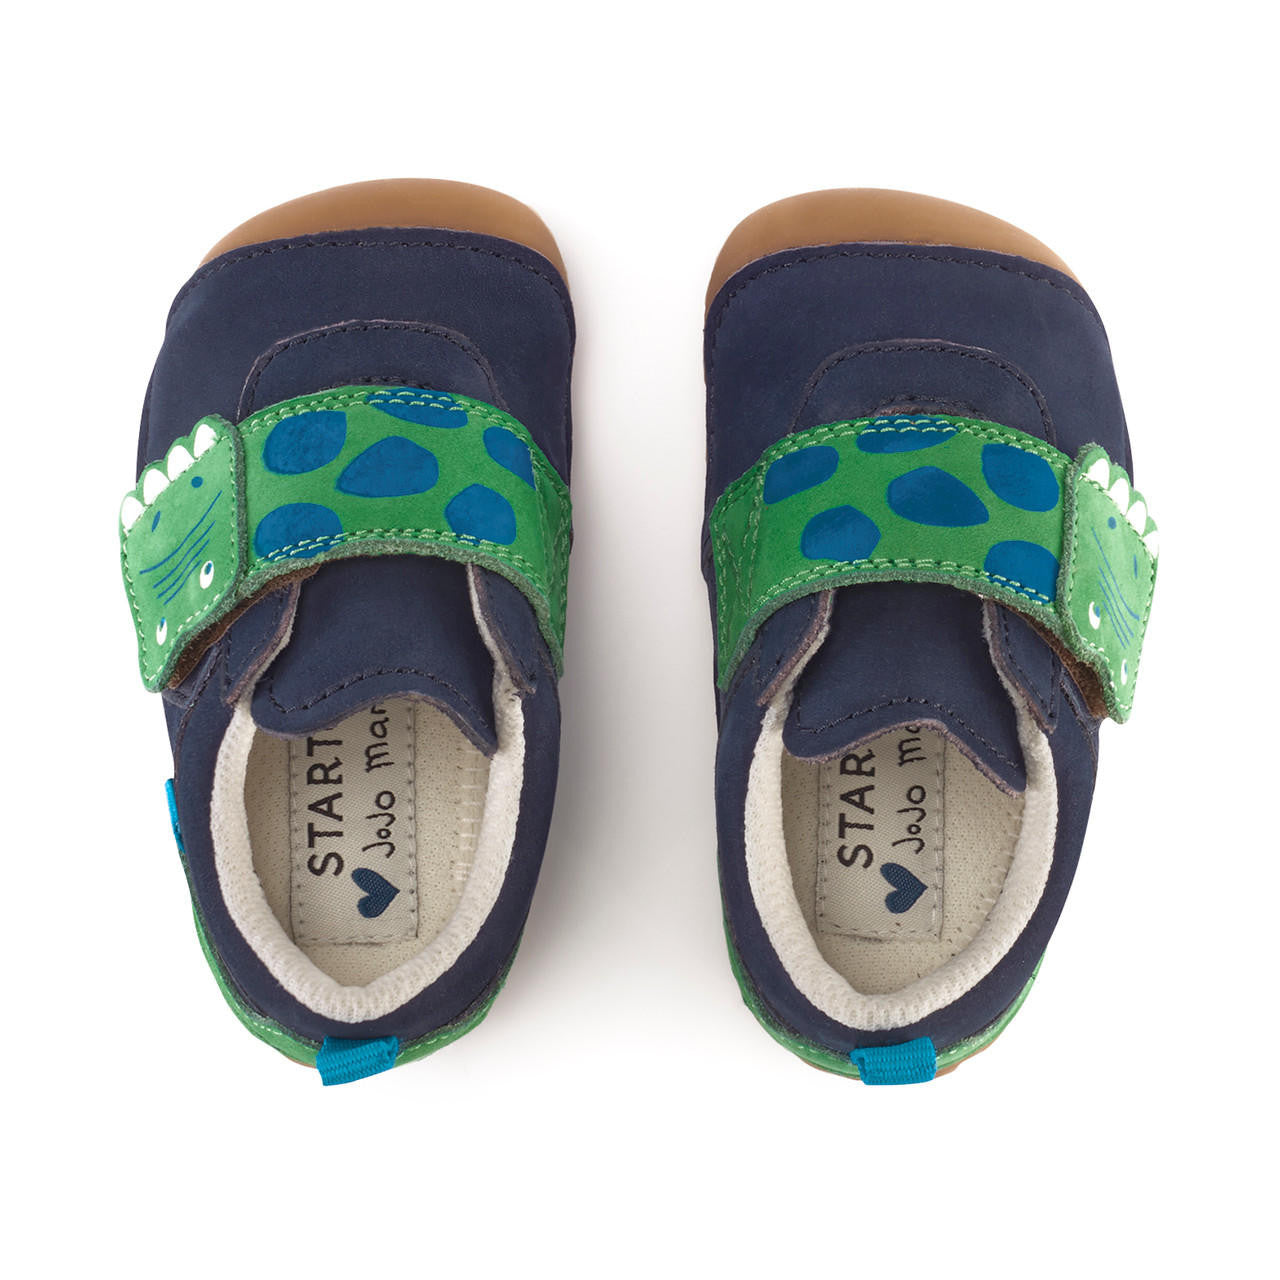 A pair of boys pre walkers by Start Rite and JoJo Maman Bebé collaboration ,style Companion,in Navy multi with dinosaur velcro fastening. View from above.